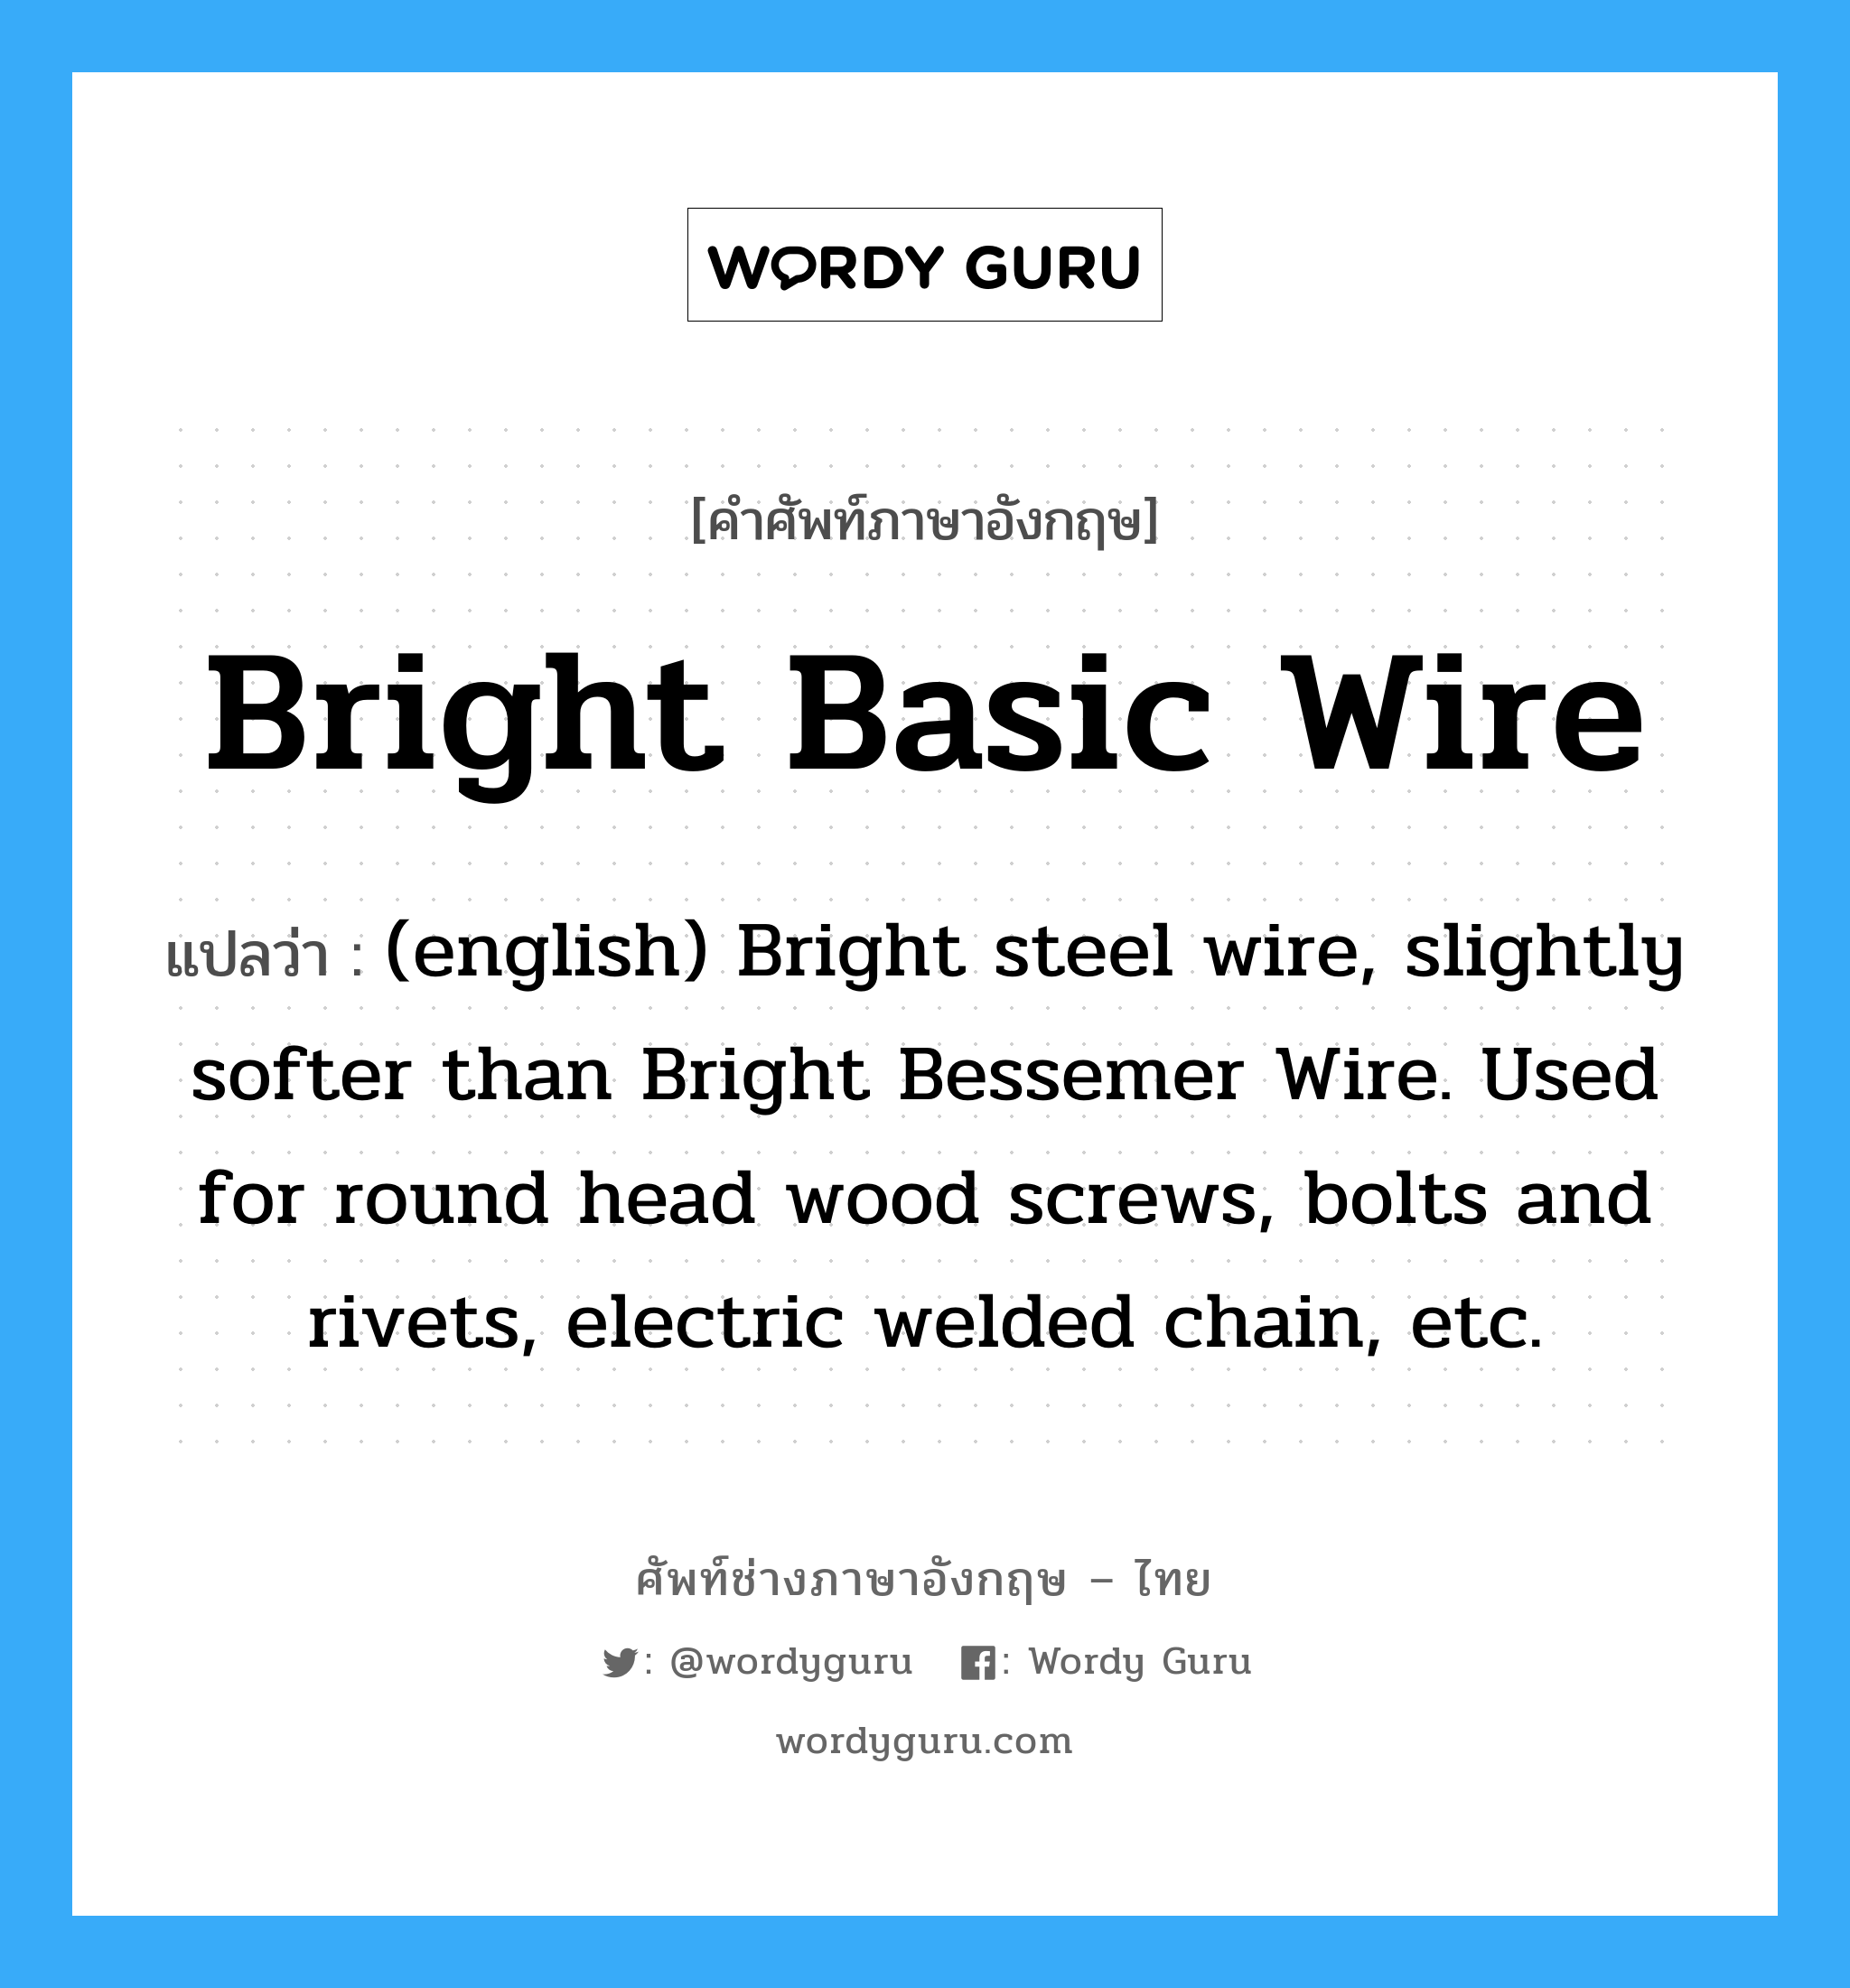 Bright Basic Wire แปลว่า?, คำศัพท์ช่างภาษาอังกฤษ - ไทย Bright Basic Wire คำศัพท์ภาษาอังกฤษ Bright Basic Wire แปลว่า (english) Bright steel wire, slightly softer than Bright Bessemer Wire. Used for round head wood screws, bolts and rivets, electric welded chain, etc.